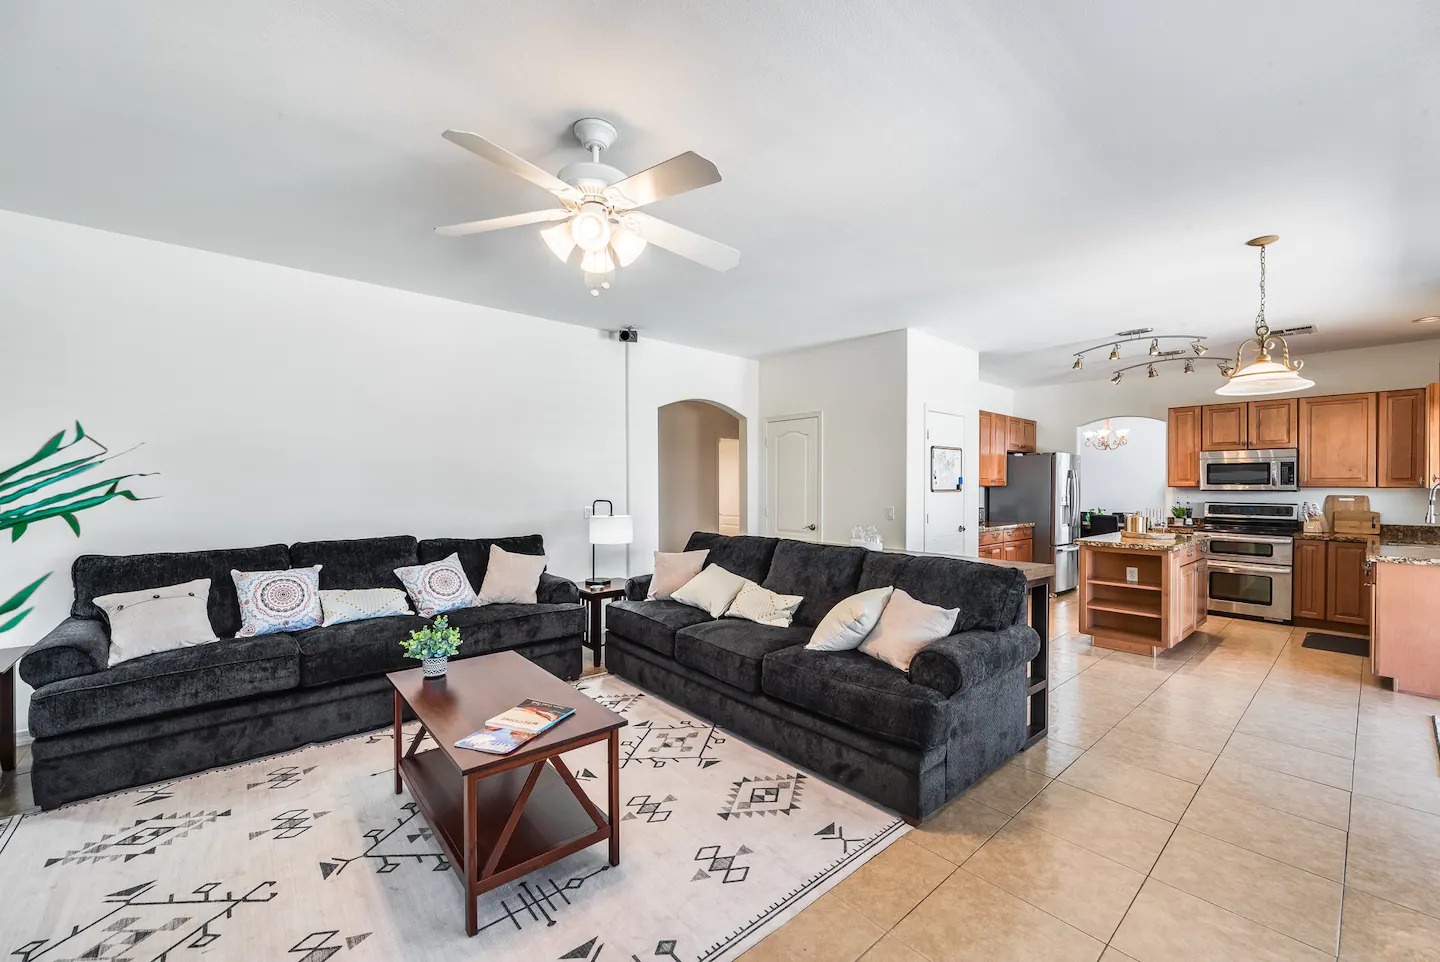 Peoria Vacation Rentals, Cherry Hills - Spacious living room for your gatherings